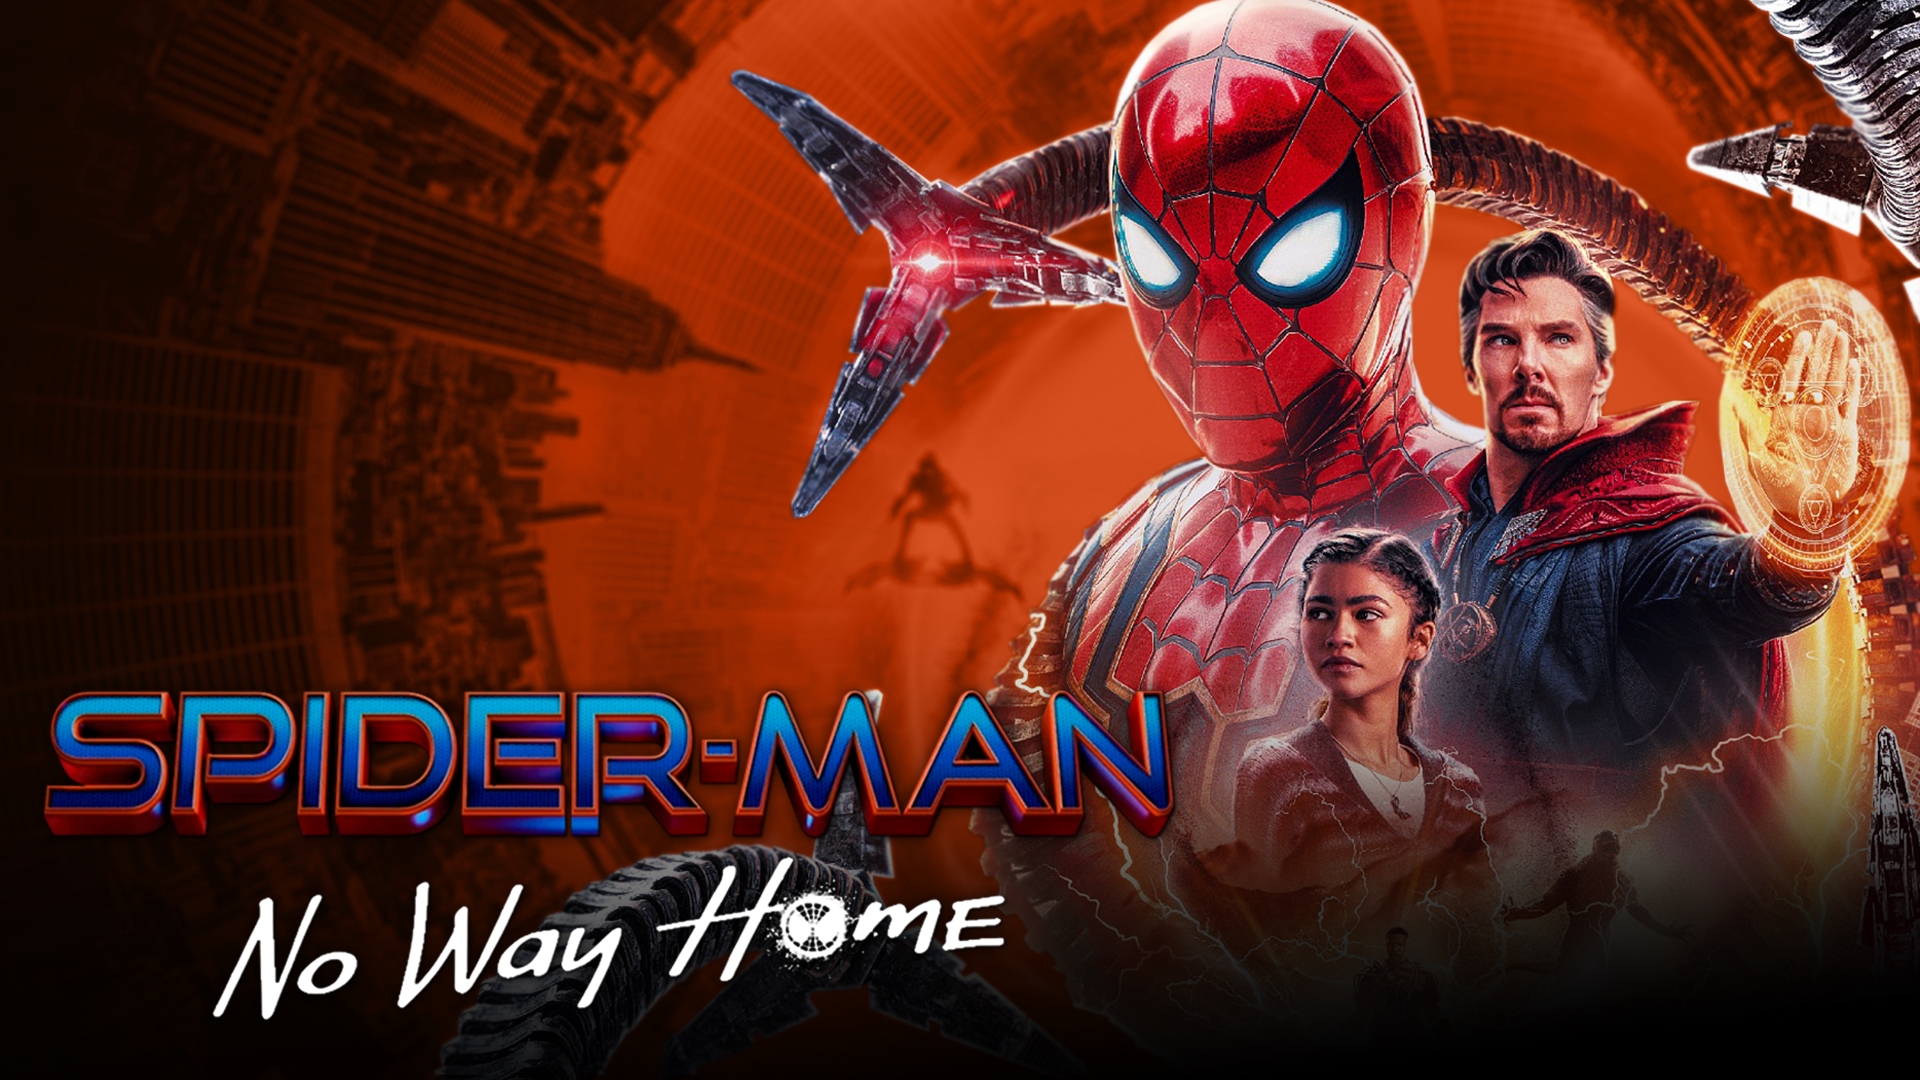 Spider-Man: No Way Home uses nostalgia to weave amazing story